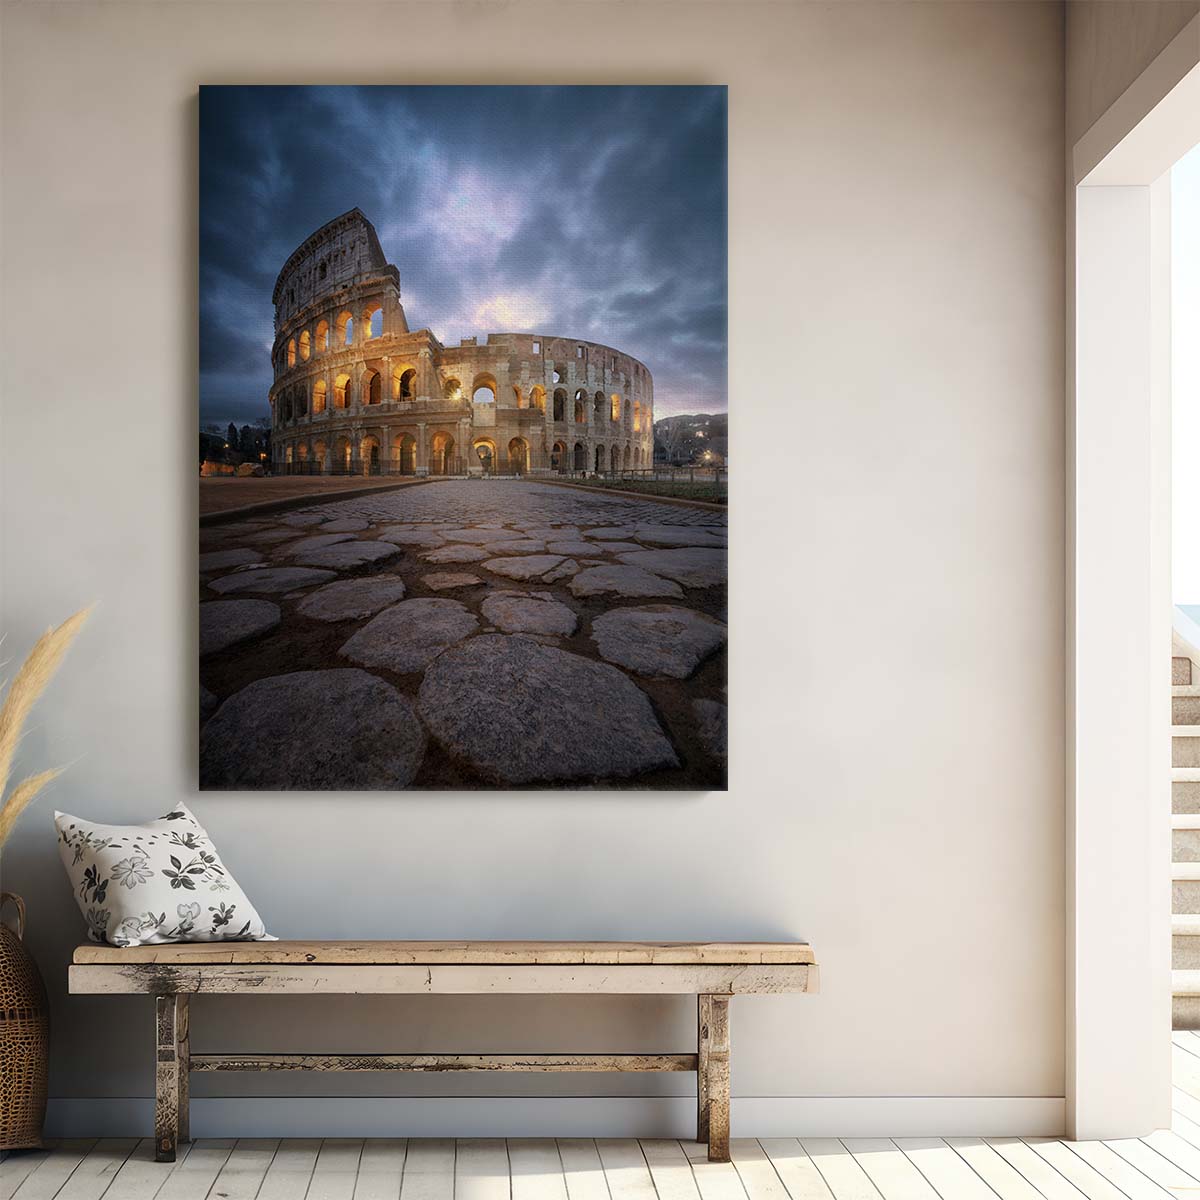 Colosseum Rome Night Photography Iconic Ancient Italian Landmark by Luxuriance Designs, made in USA